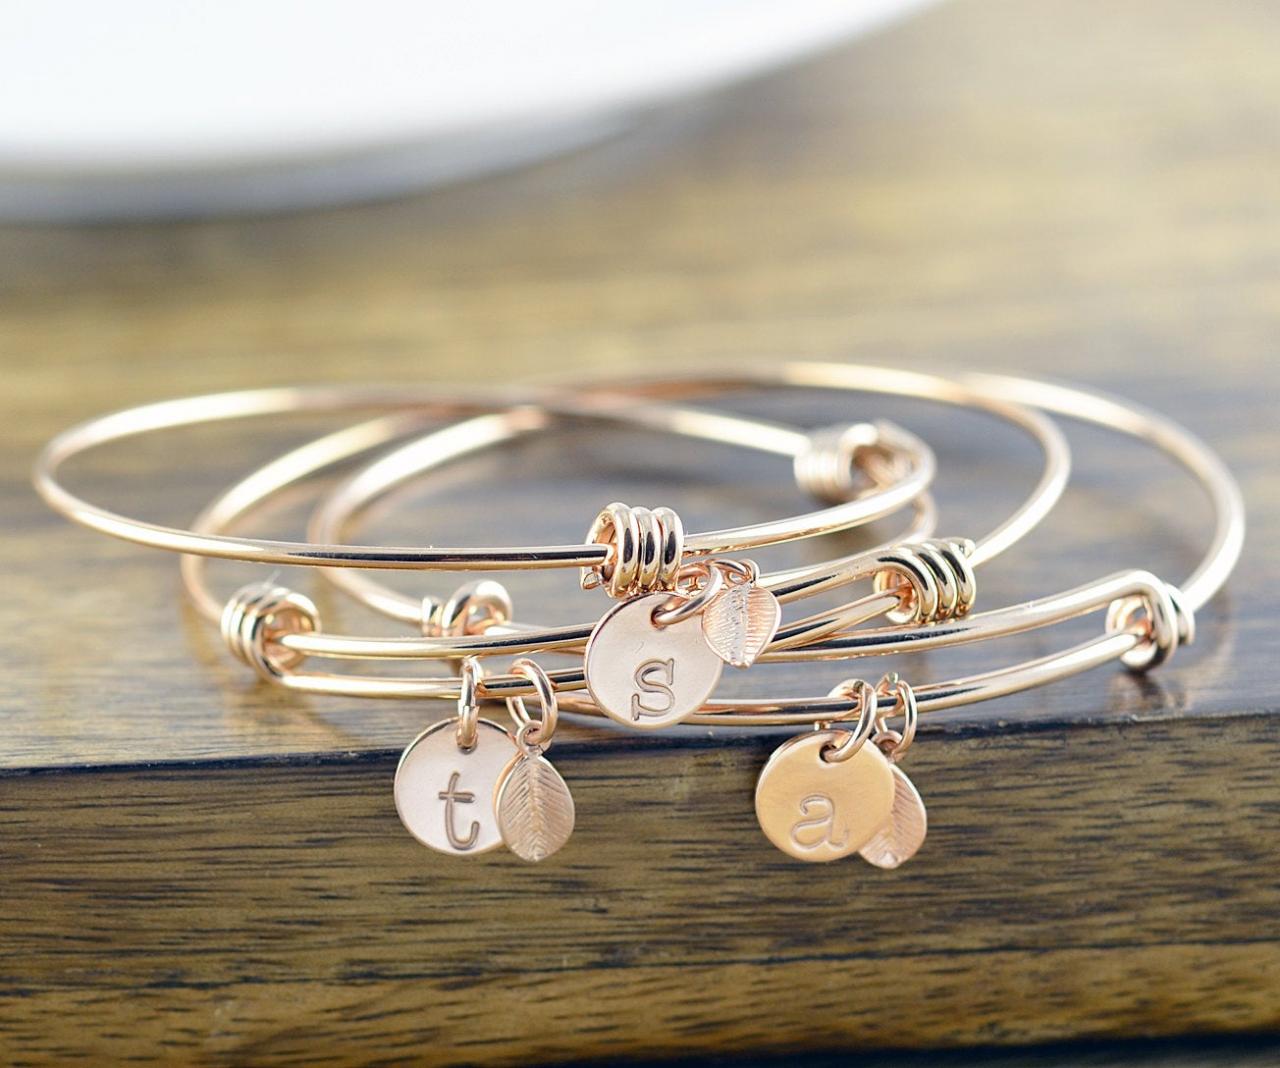 Rose Gold Bracelet - Personalized Initial Bracelet - Personalized Hand Stamped Bracelet - Bridesmaid Gift - Bridesmaid Jewelry